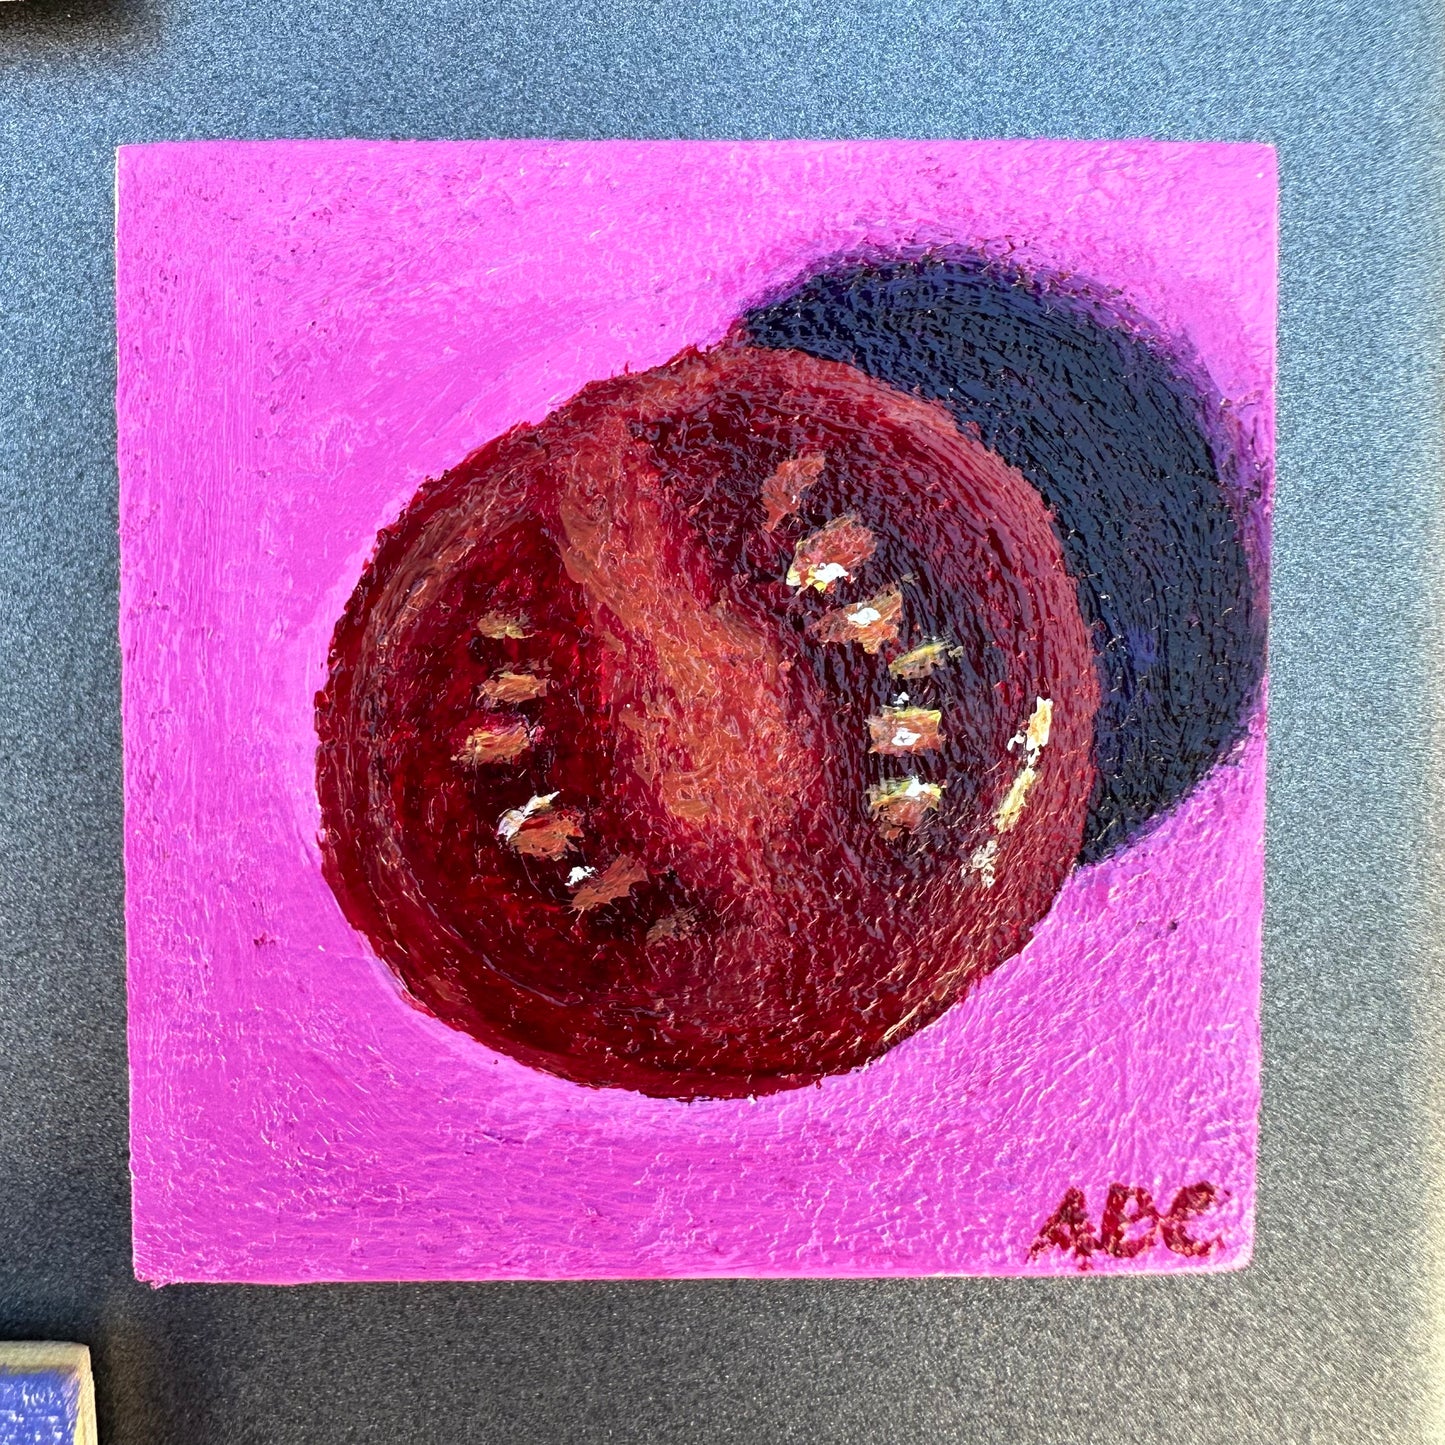 Teeny Tomato - 2x2 - oil on panel - magnet oil painting